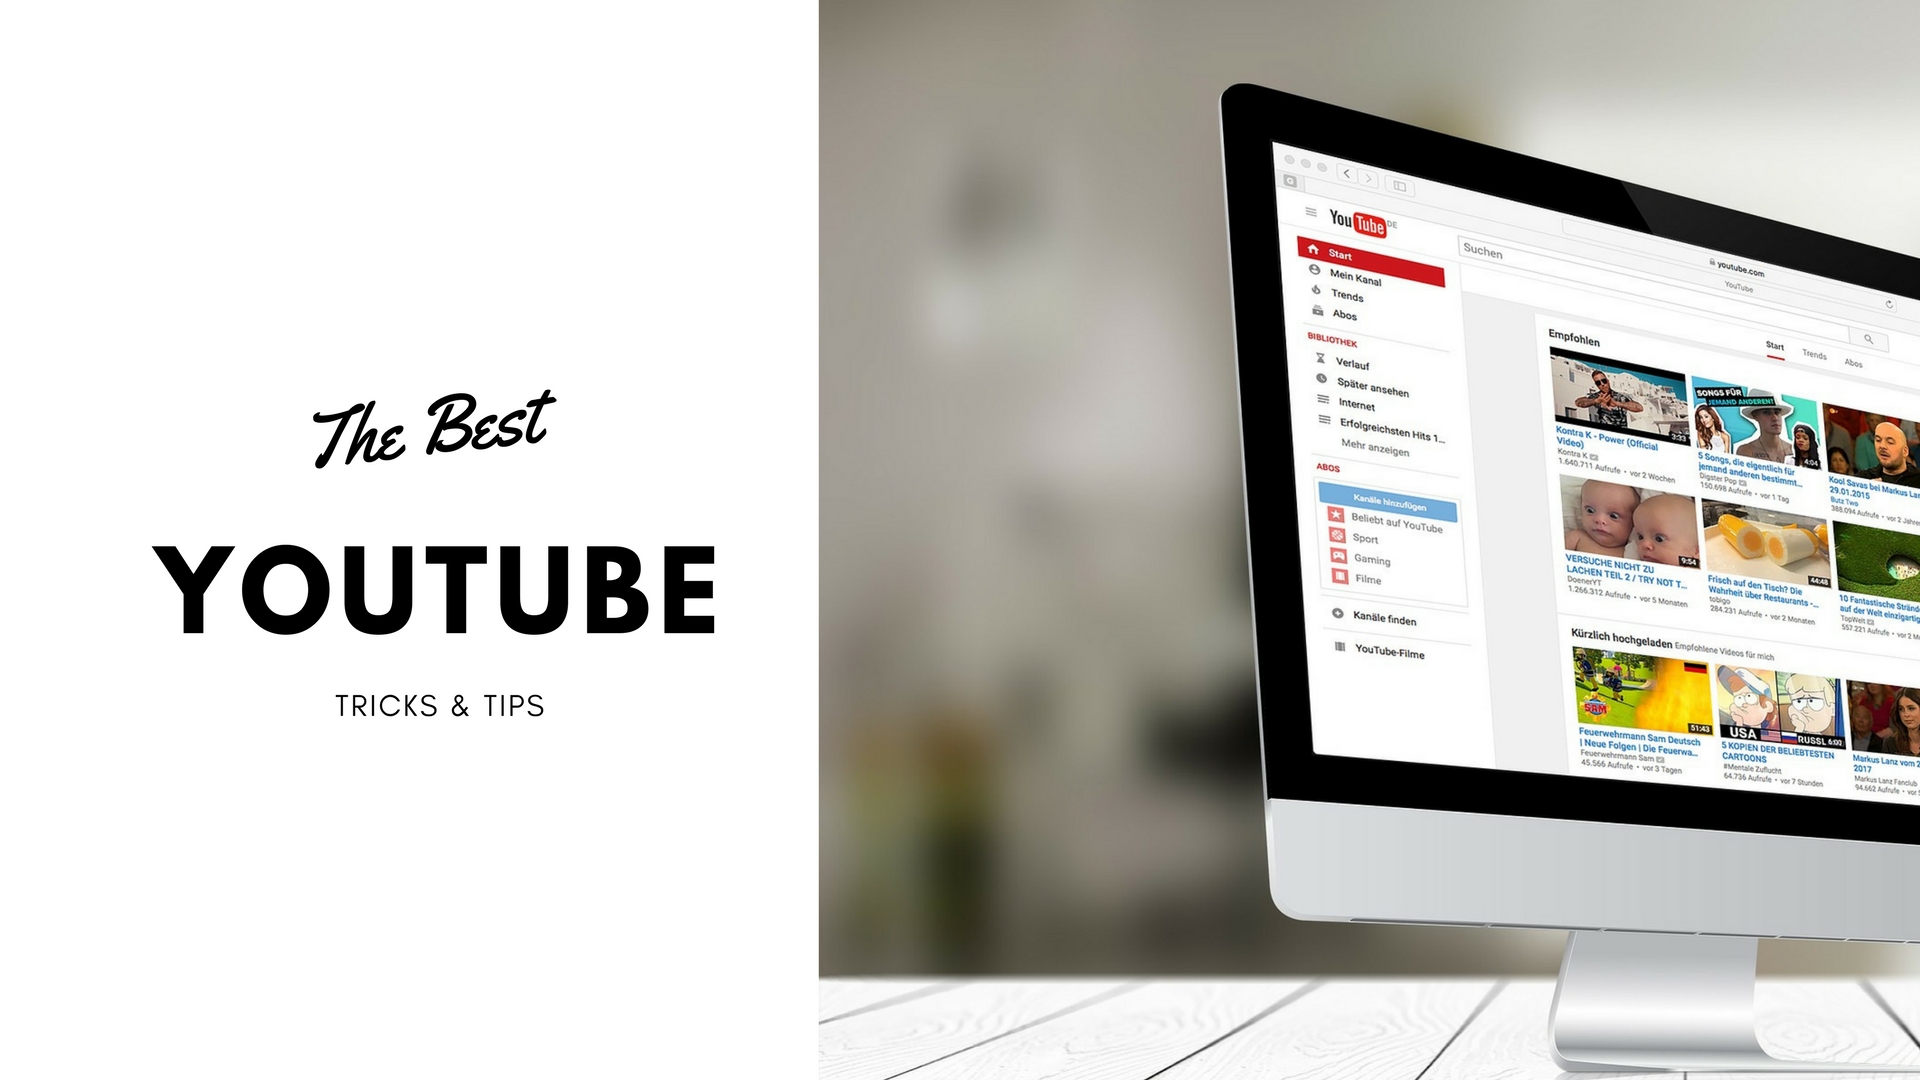 Youtube Tricks - How to download Youtube videos & more ...